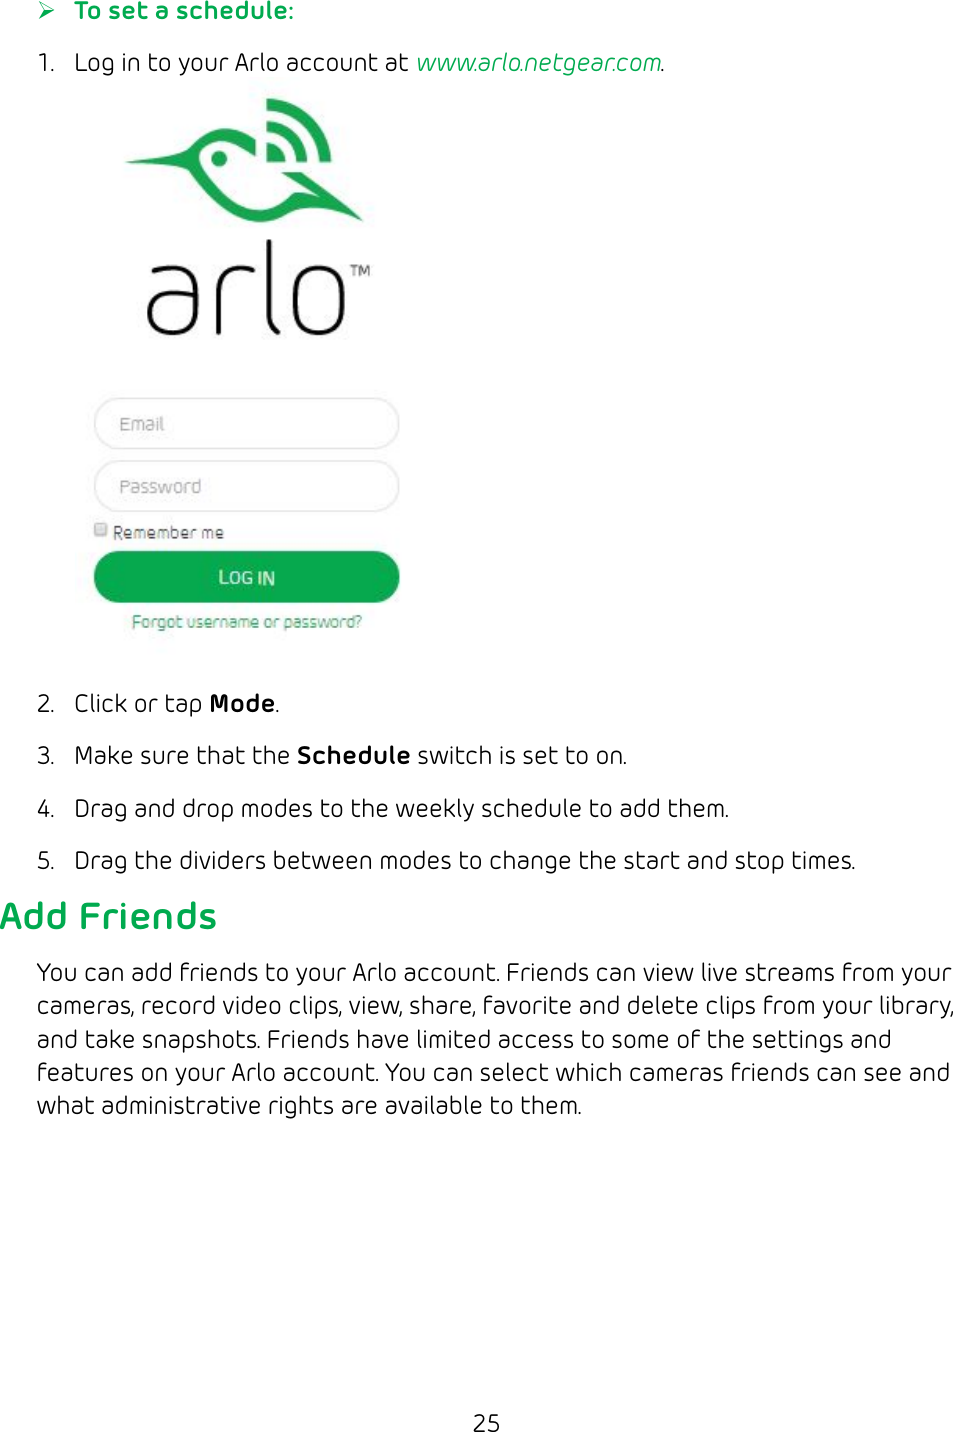 25 ¾To set a schedule:1.  Log in to your Arlo account at www.arlo.netgear.com.2.  Click or tap Mode.3.  Make sure that the Schedule switch is set to on.4.  Drag and drop modes to the weekly schedule to add them.5.  Drag the dividers between modes to change the start and stop times.Add FriendsYou can add friends to your Arlo account. Friends can view live streams from your cameras, record video clips, view, share, favorite and delete clips from your library, and take snapshots. Friends have limited access to some of the settings and features on your Arlo account. You can select which cameras friends can see and what administrative rights are available to them.